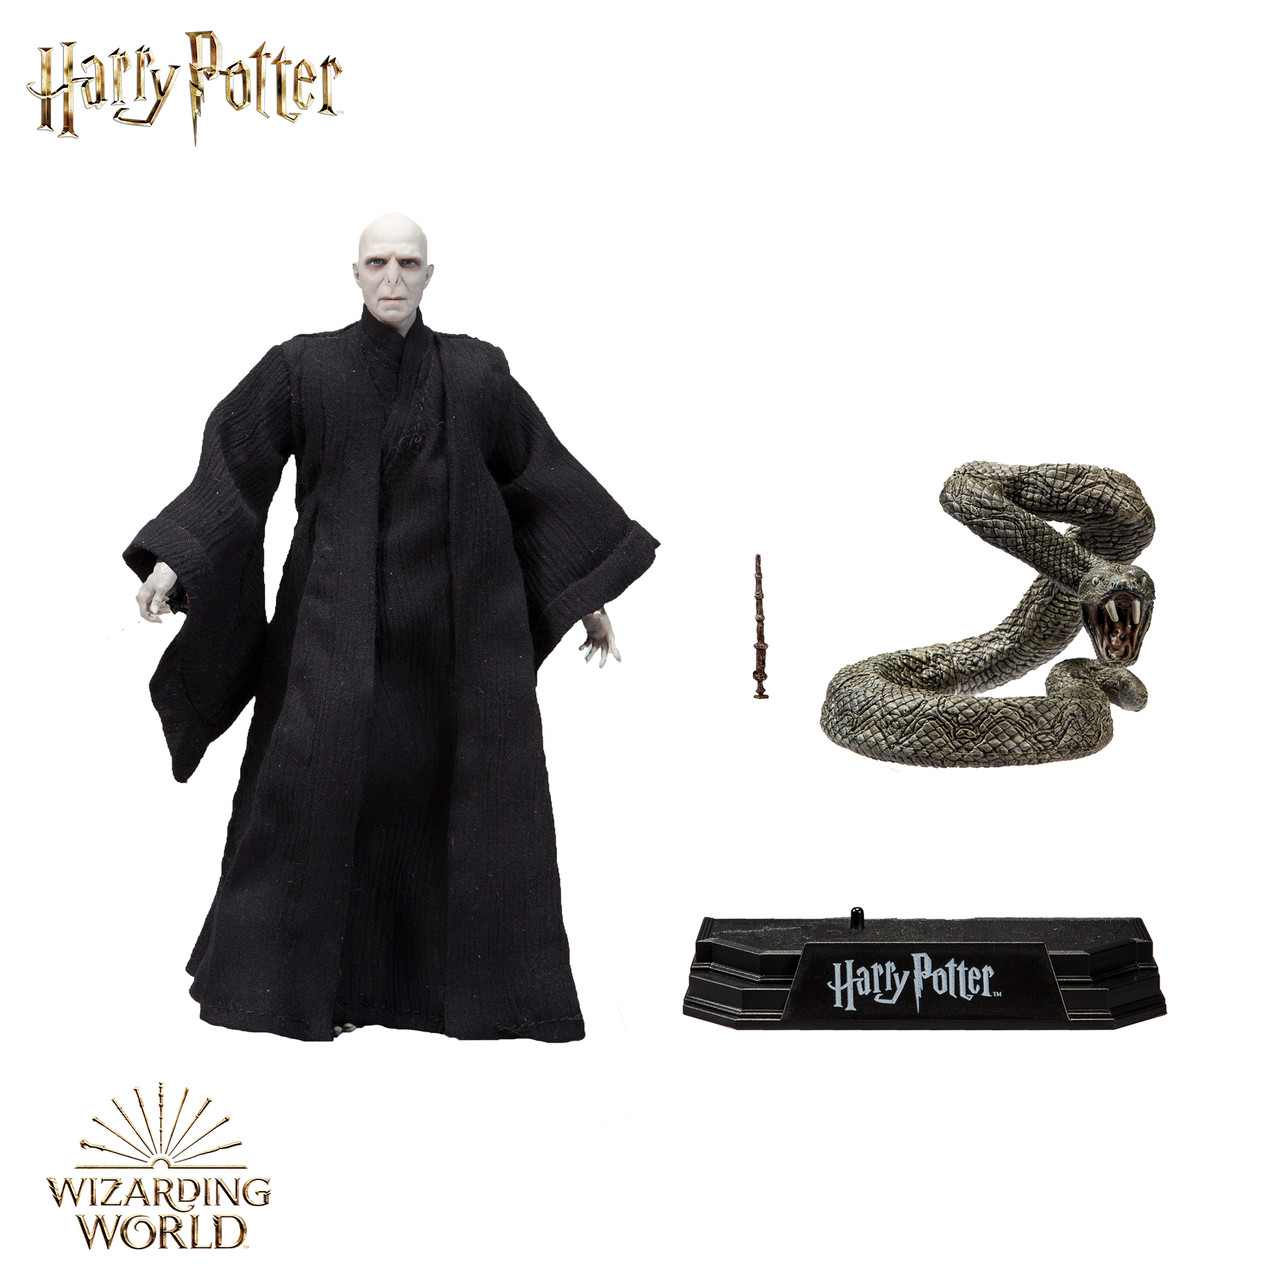 HARRY POTTER ACTION FIGURE WAVE 1 LORD VOLDEMORT DEATHLY HOLLOWS II 